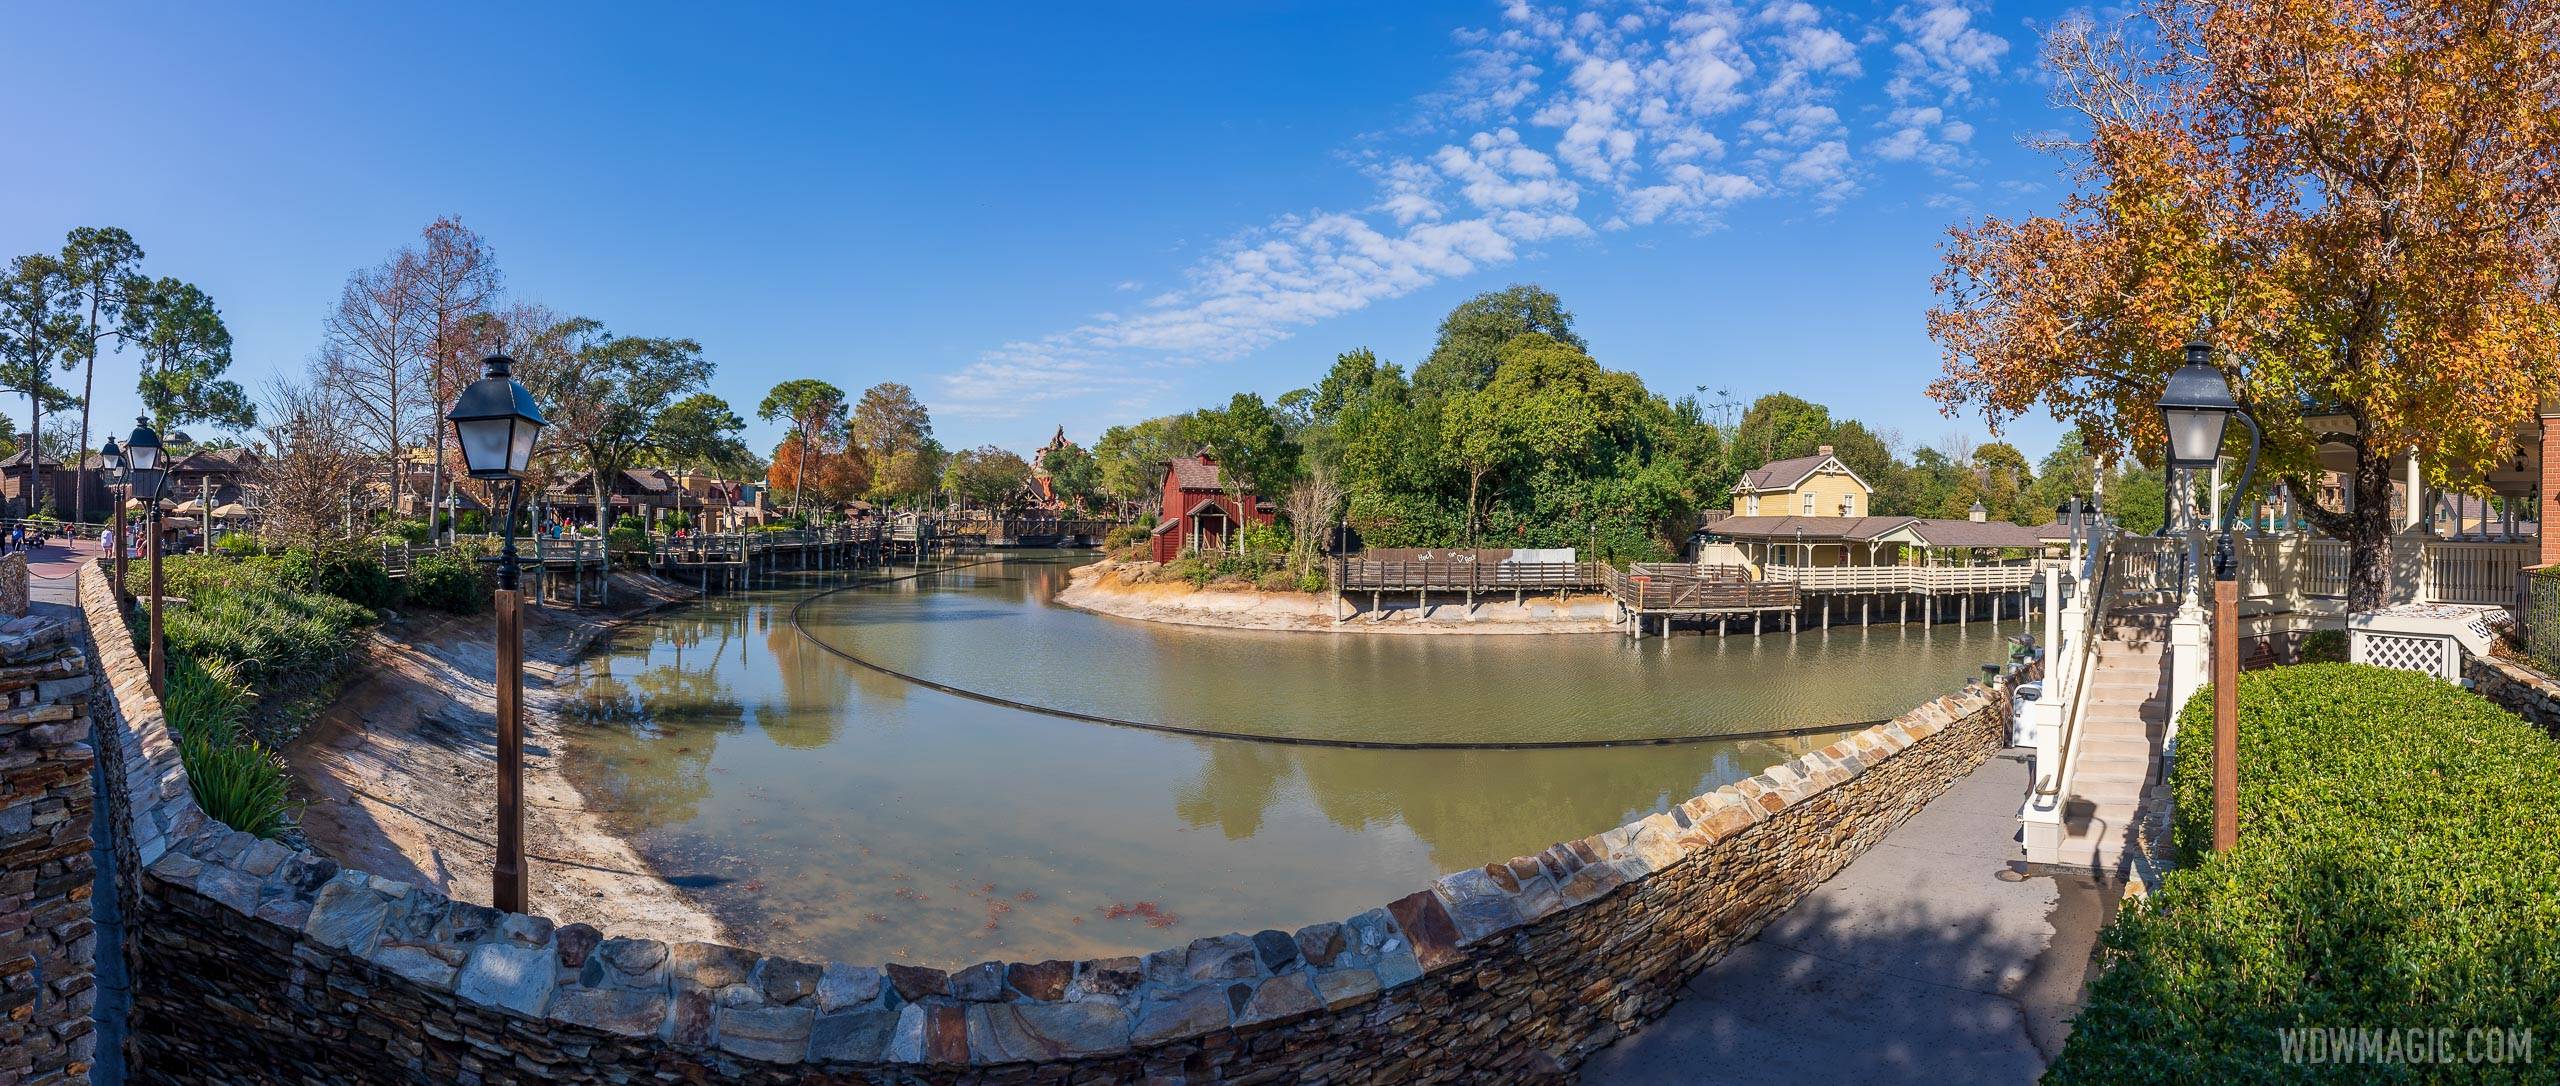 PHOTOS - Water returns to the Rivers of America as refurbishment nears completion